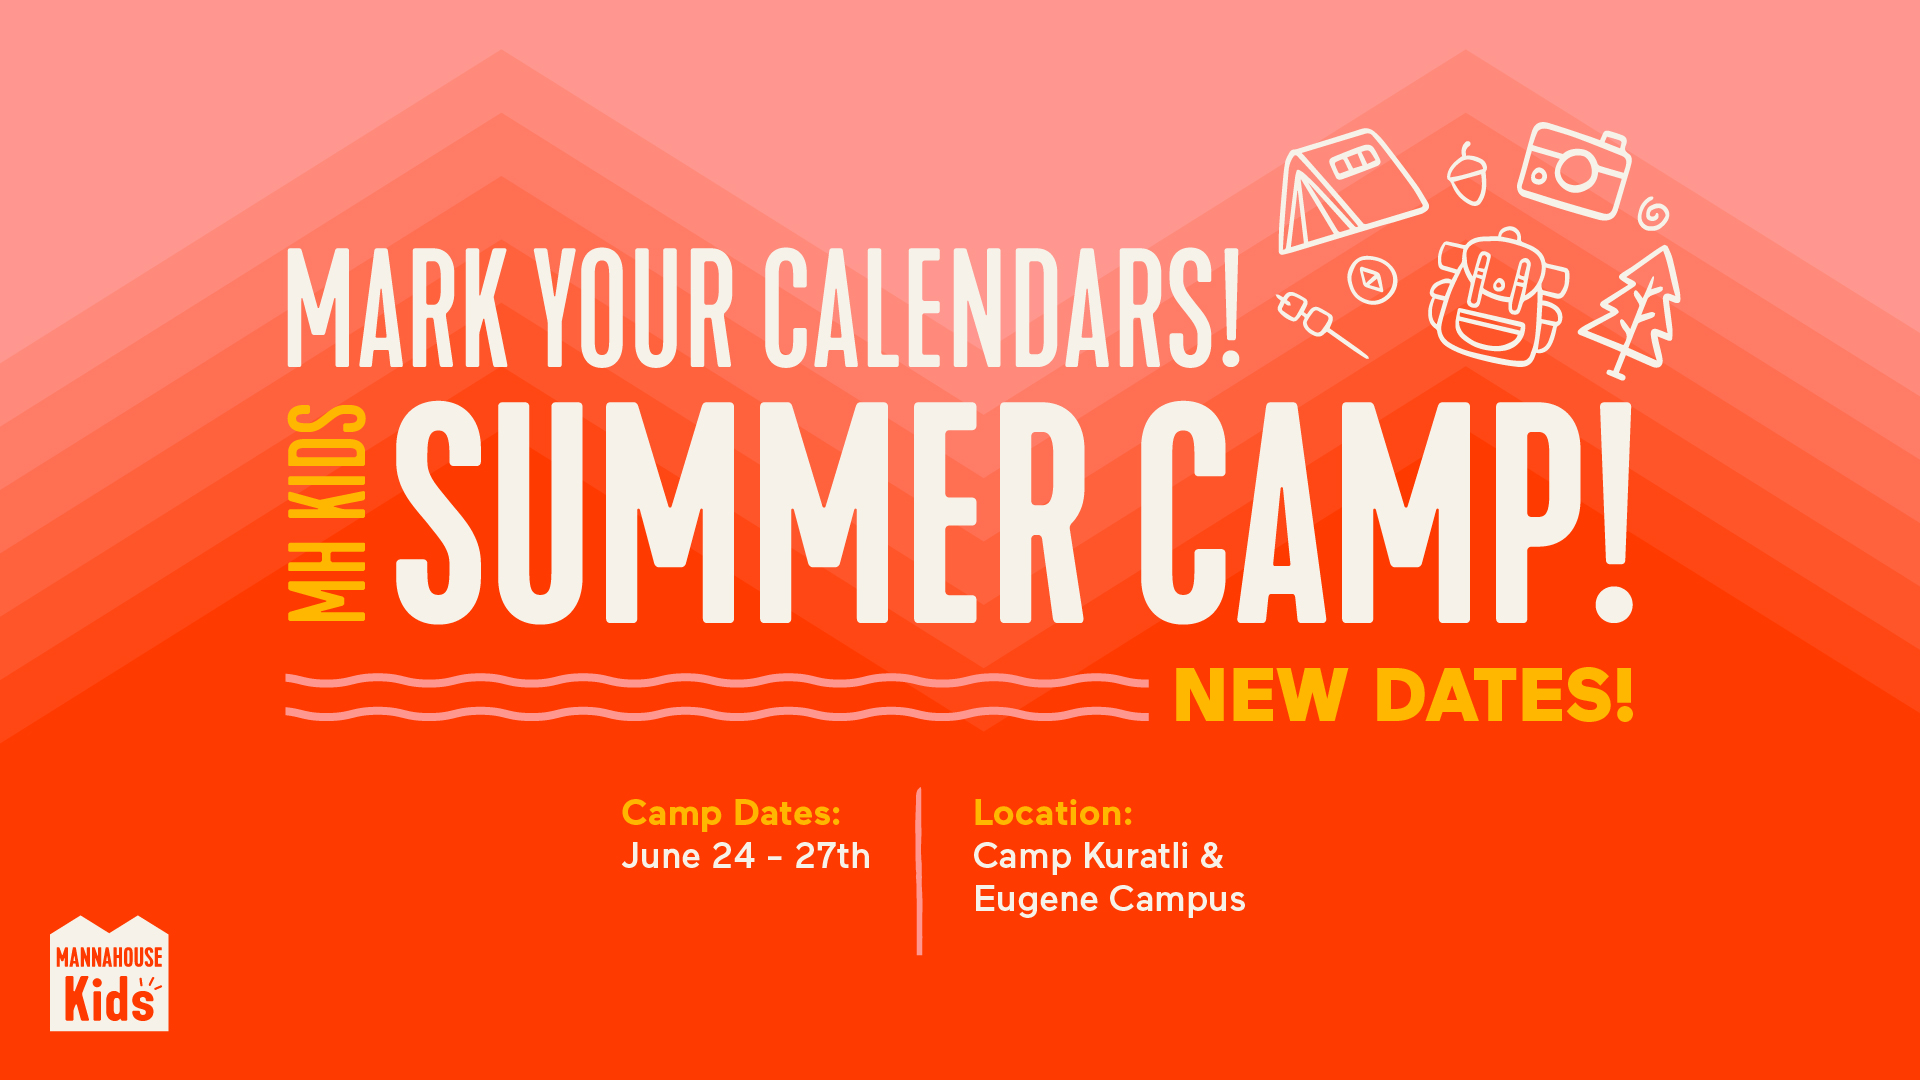 SUMMER CAMP 2024 - SAVE THE DATE - JUNE 24 TO 27TH